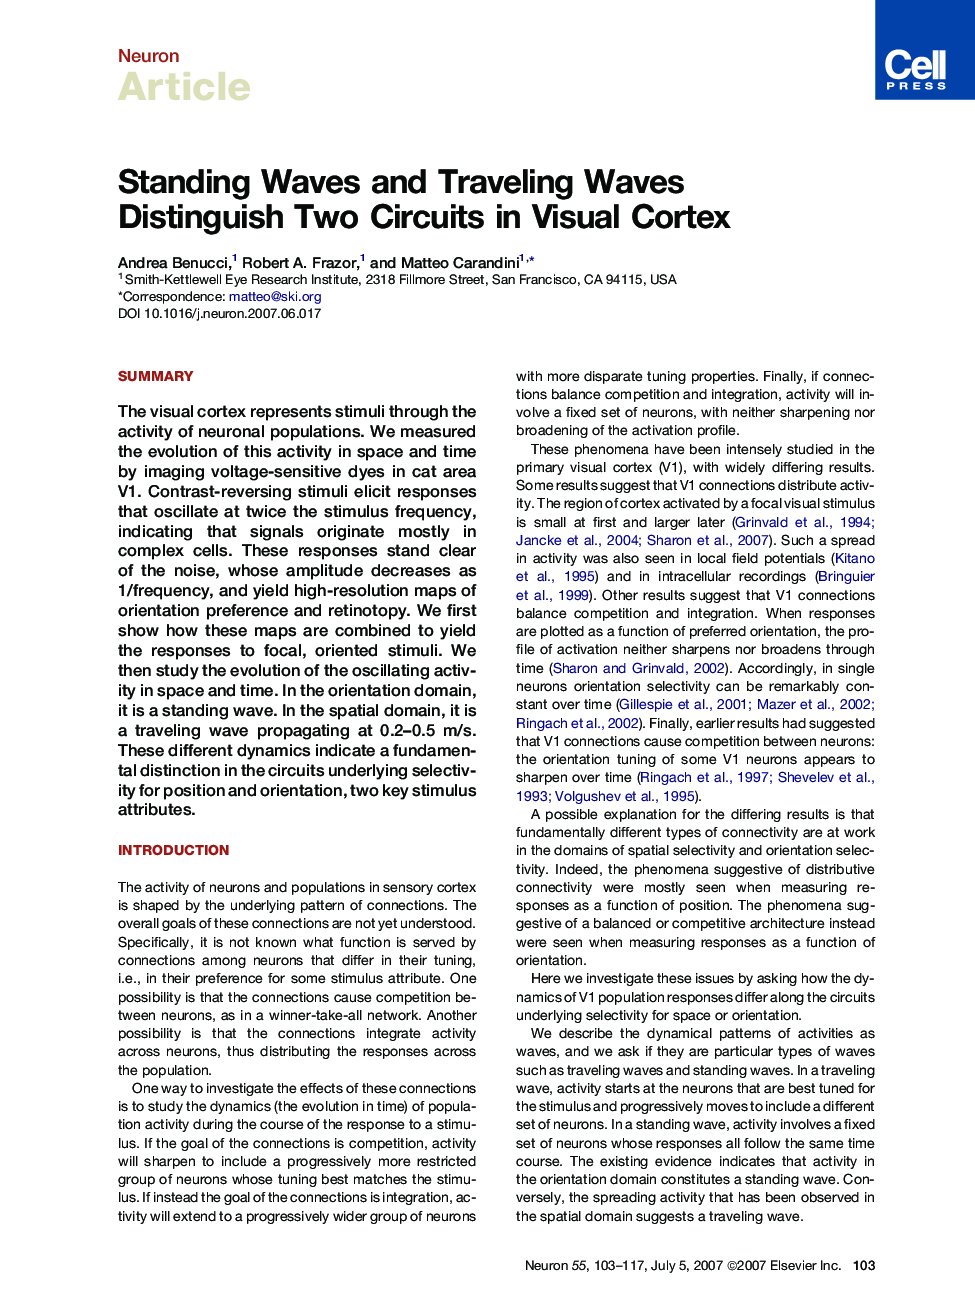 Standing Waves and Traveling Waves Distinguish Two Circuits in Visual Cortex